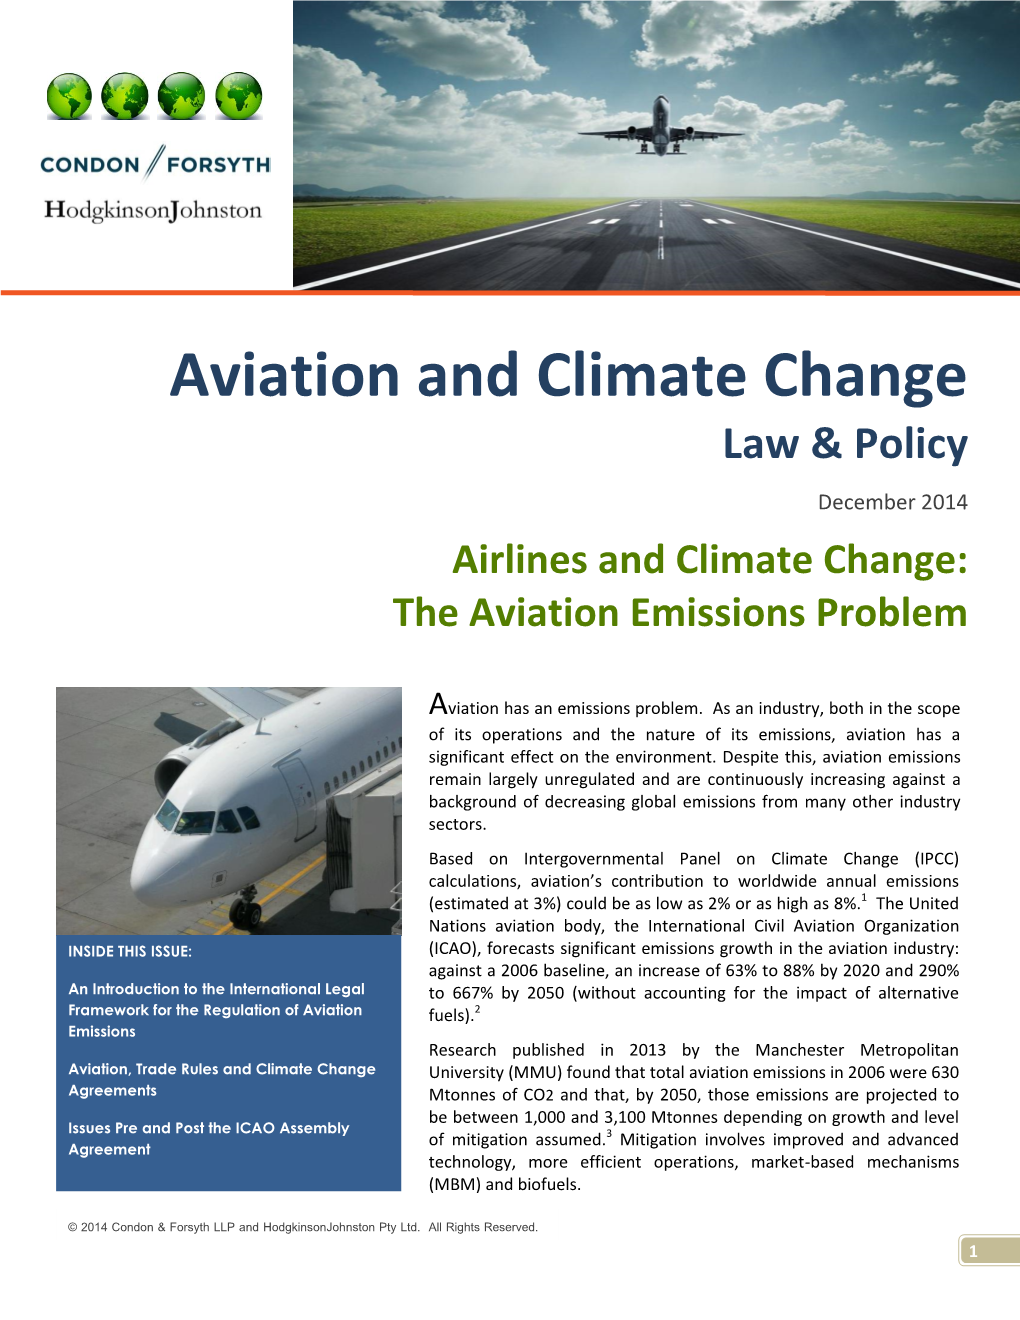 Aviation and Climate Change Law & Policy